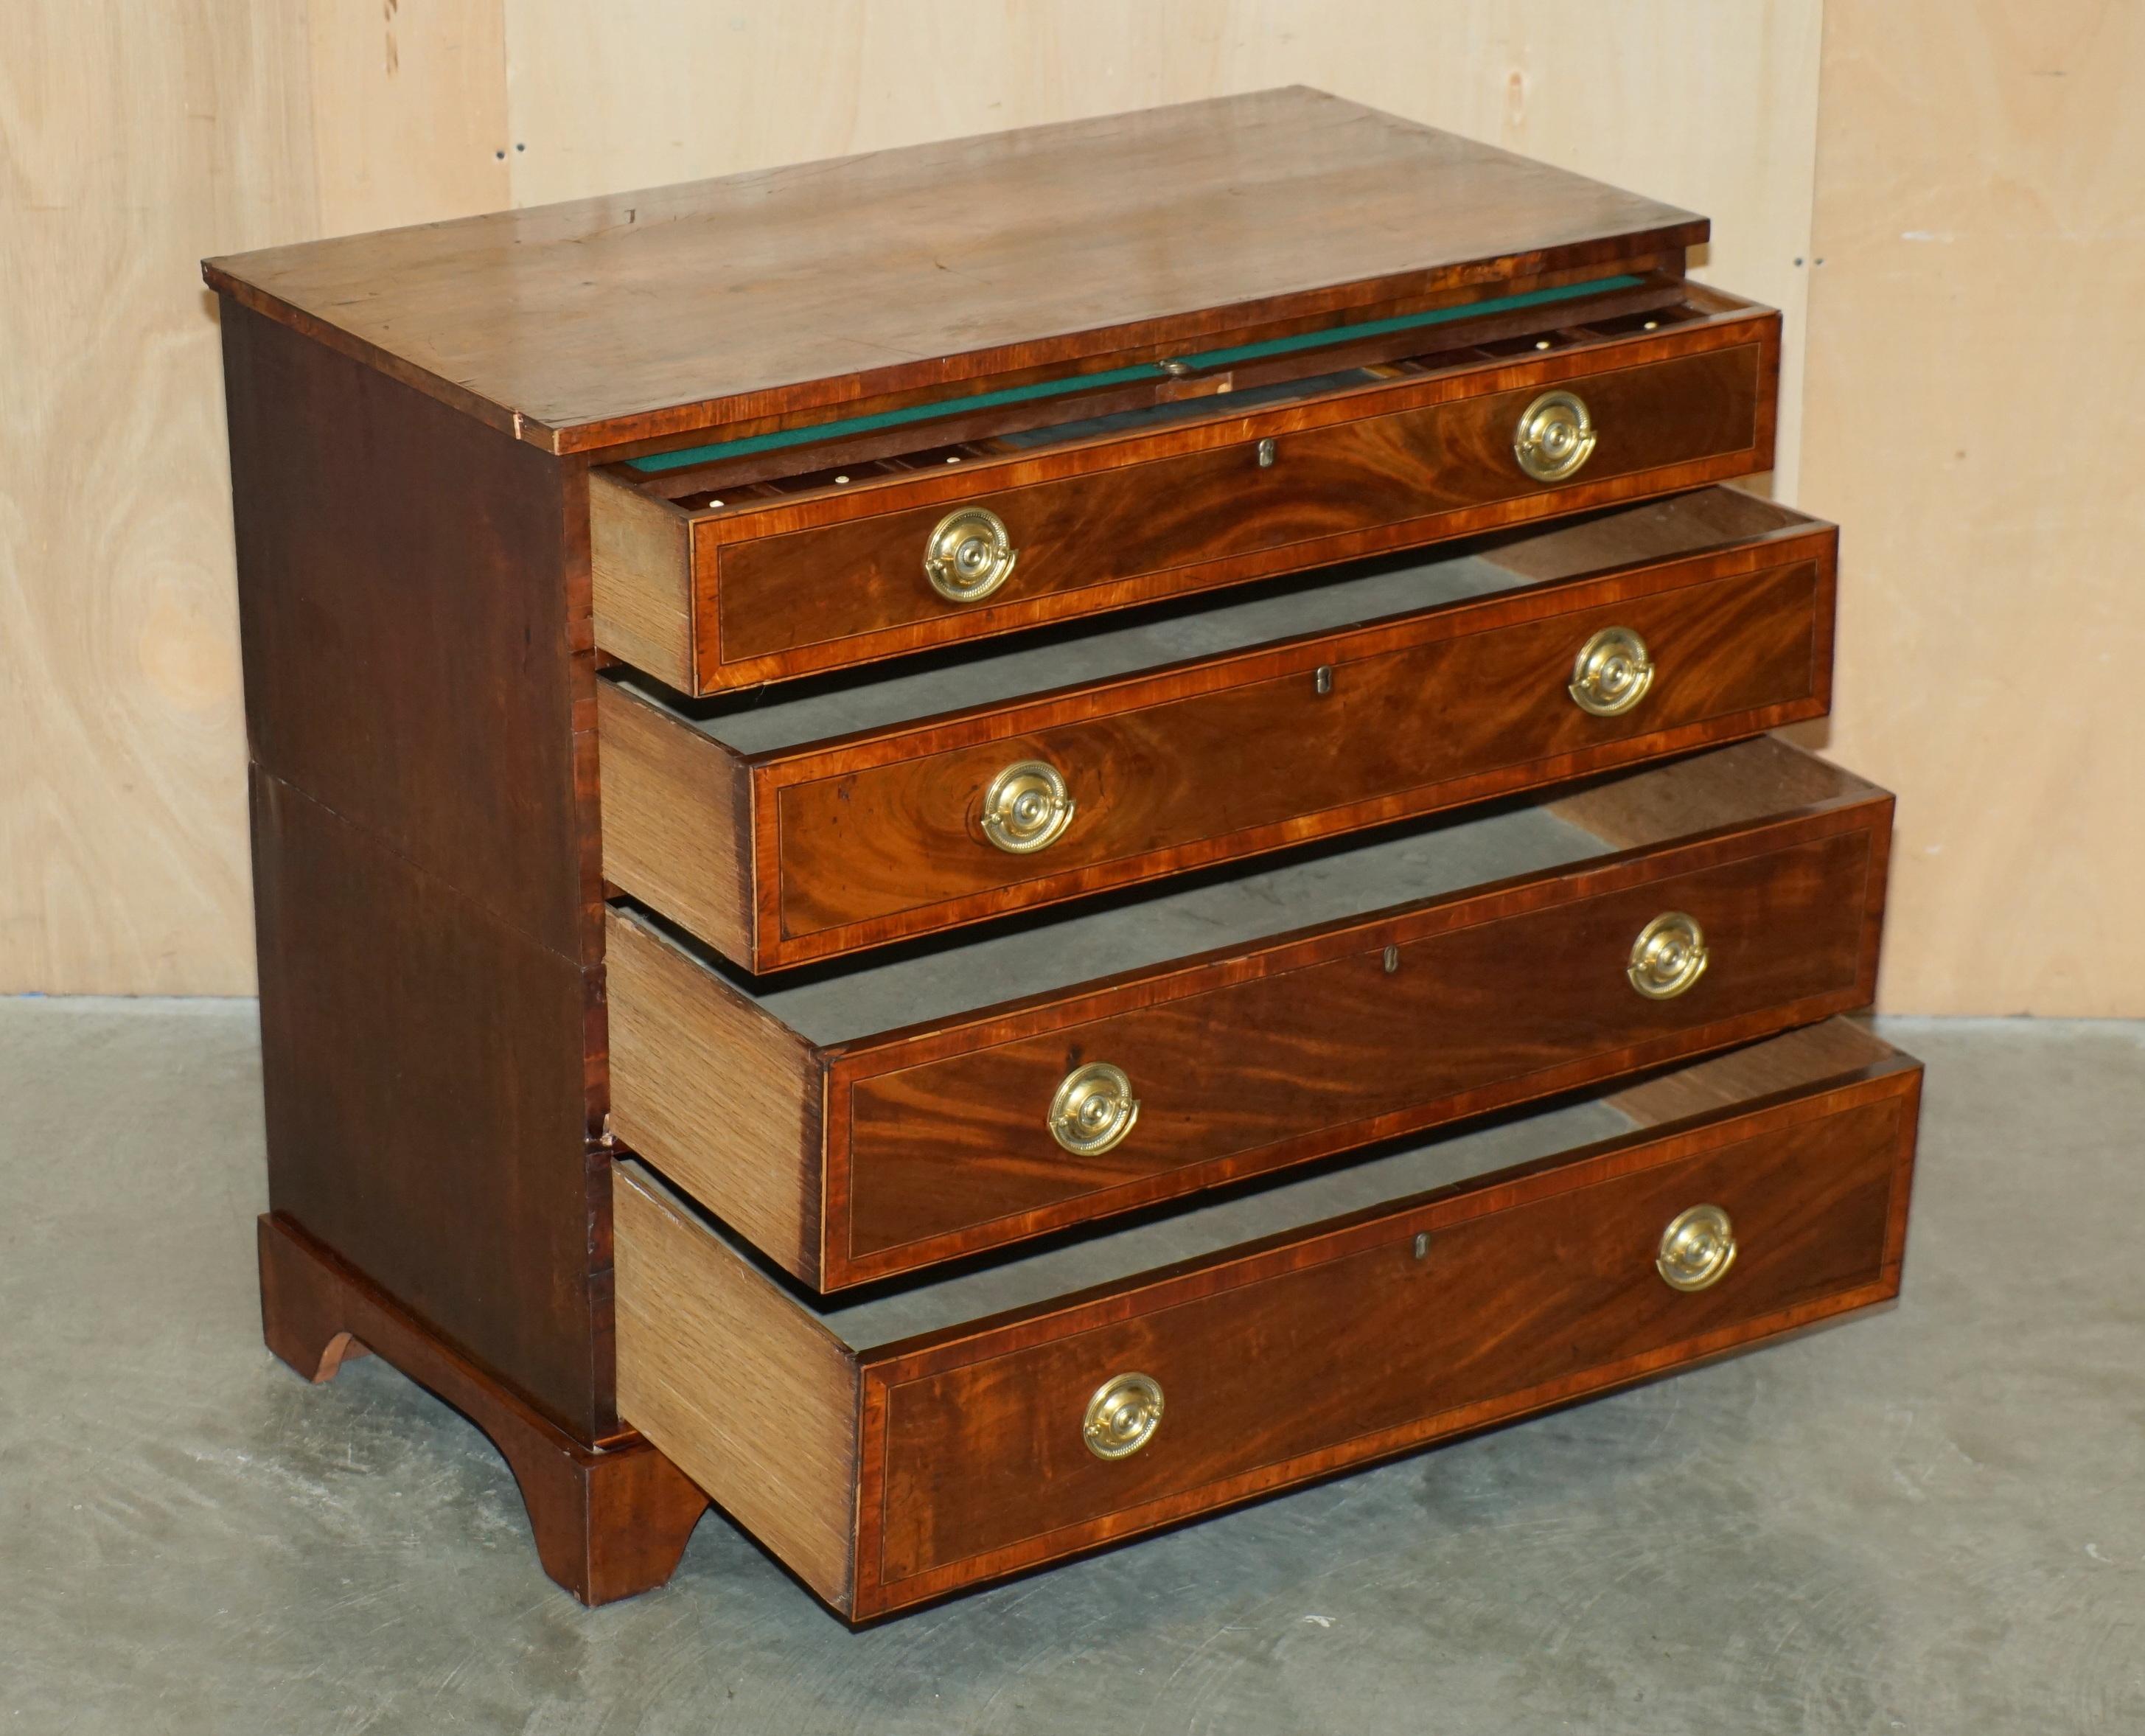 ANTiQUE GEORGE III BACHELORS CHEST OF DRAWERS ATTRIBUTED TO GILLOWS OF LANCASTER For Sale 7